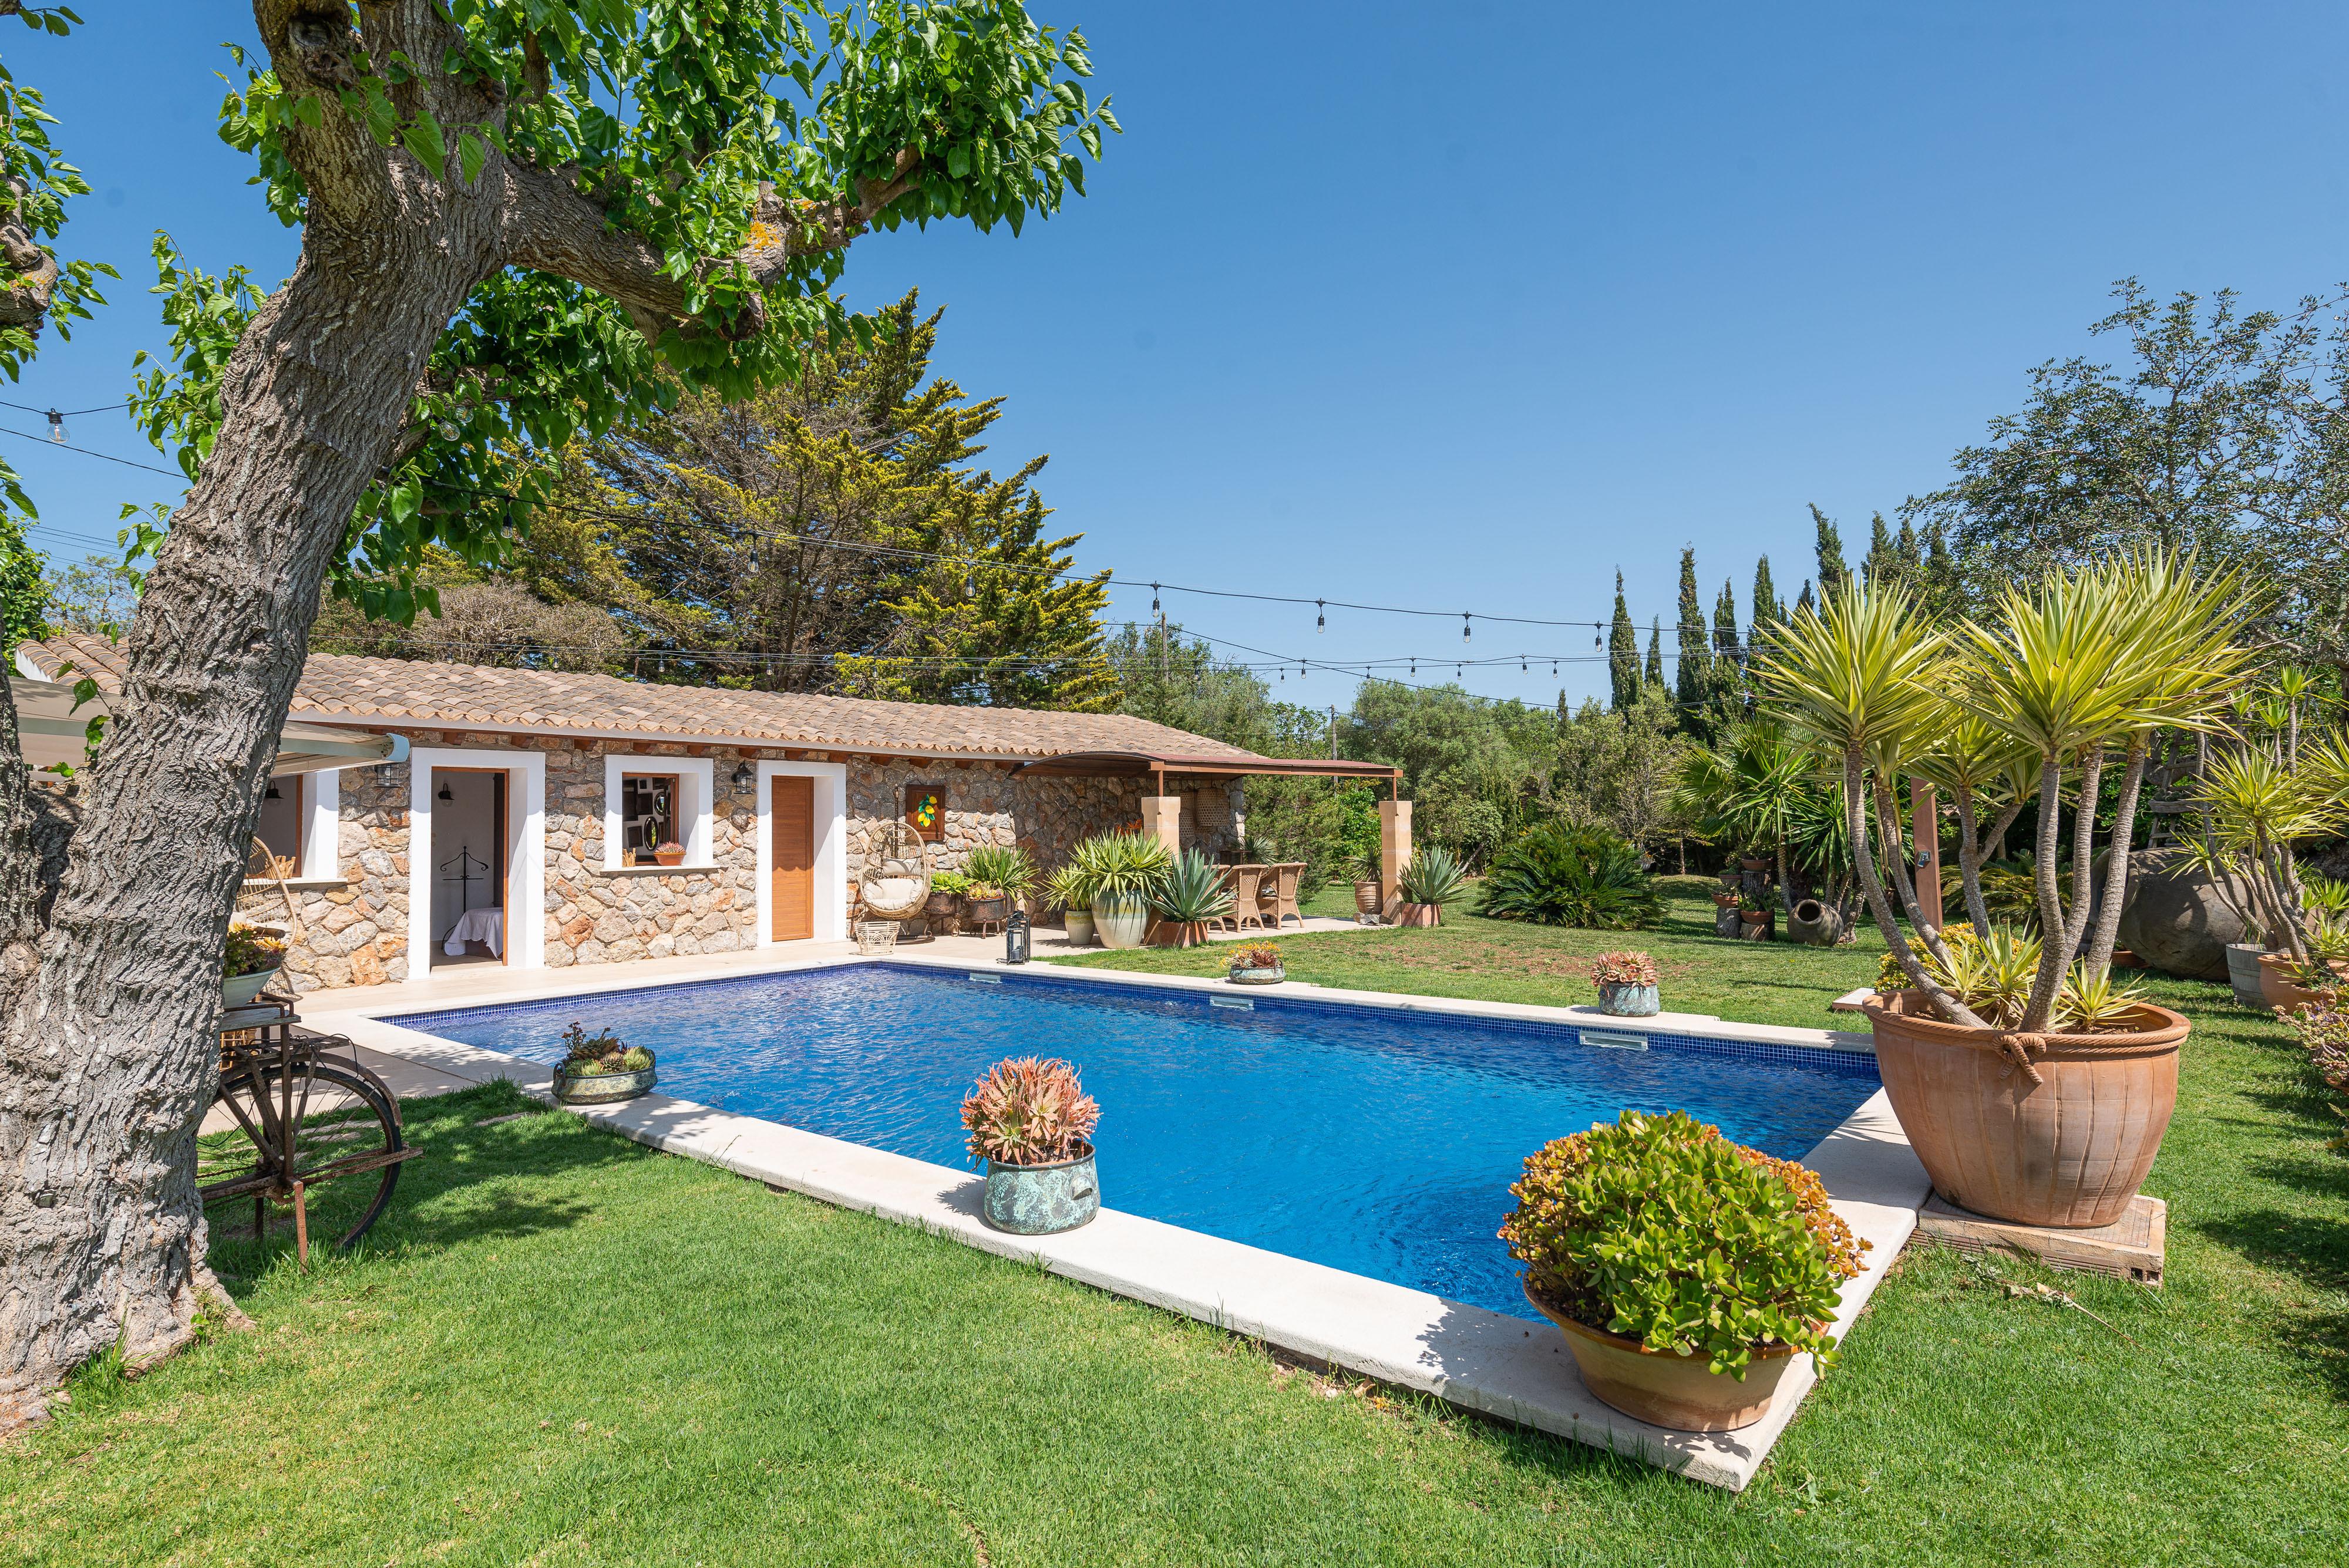 Property Image 2 - CAN SION - Villa with private pool in Esporlas. Free WiFi